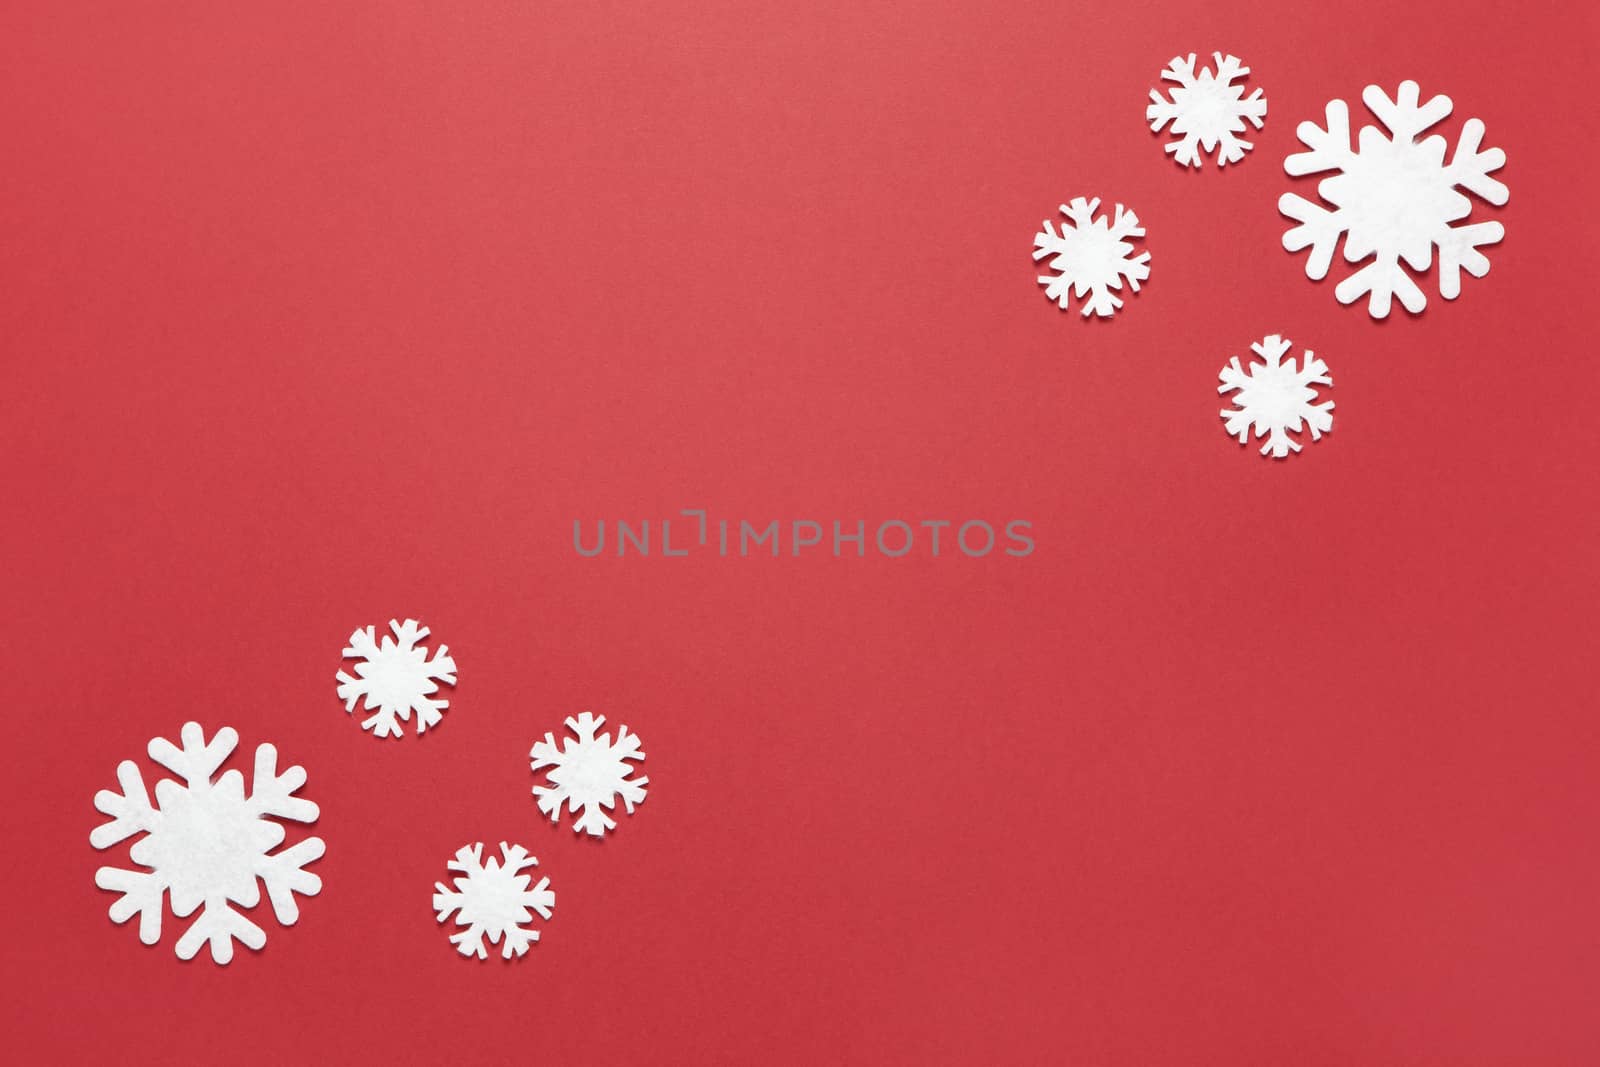 Christmas composition, group of little white felt snowflakes on burgundy red background, copy space. Festive, New Year concept. Horizontal, flat lay. Minimal style. Top view.